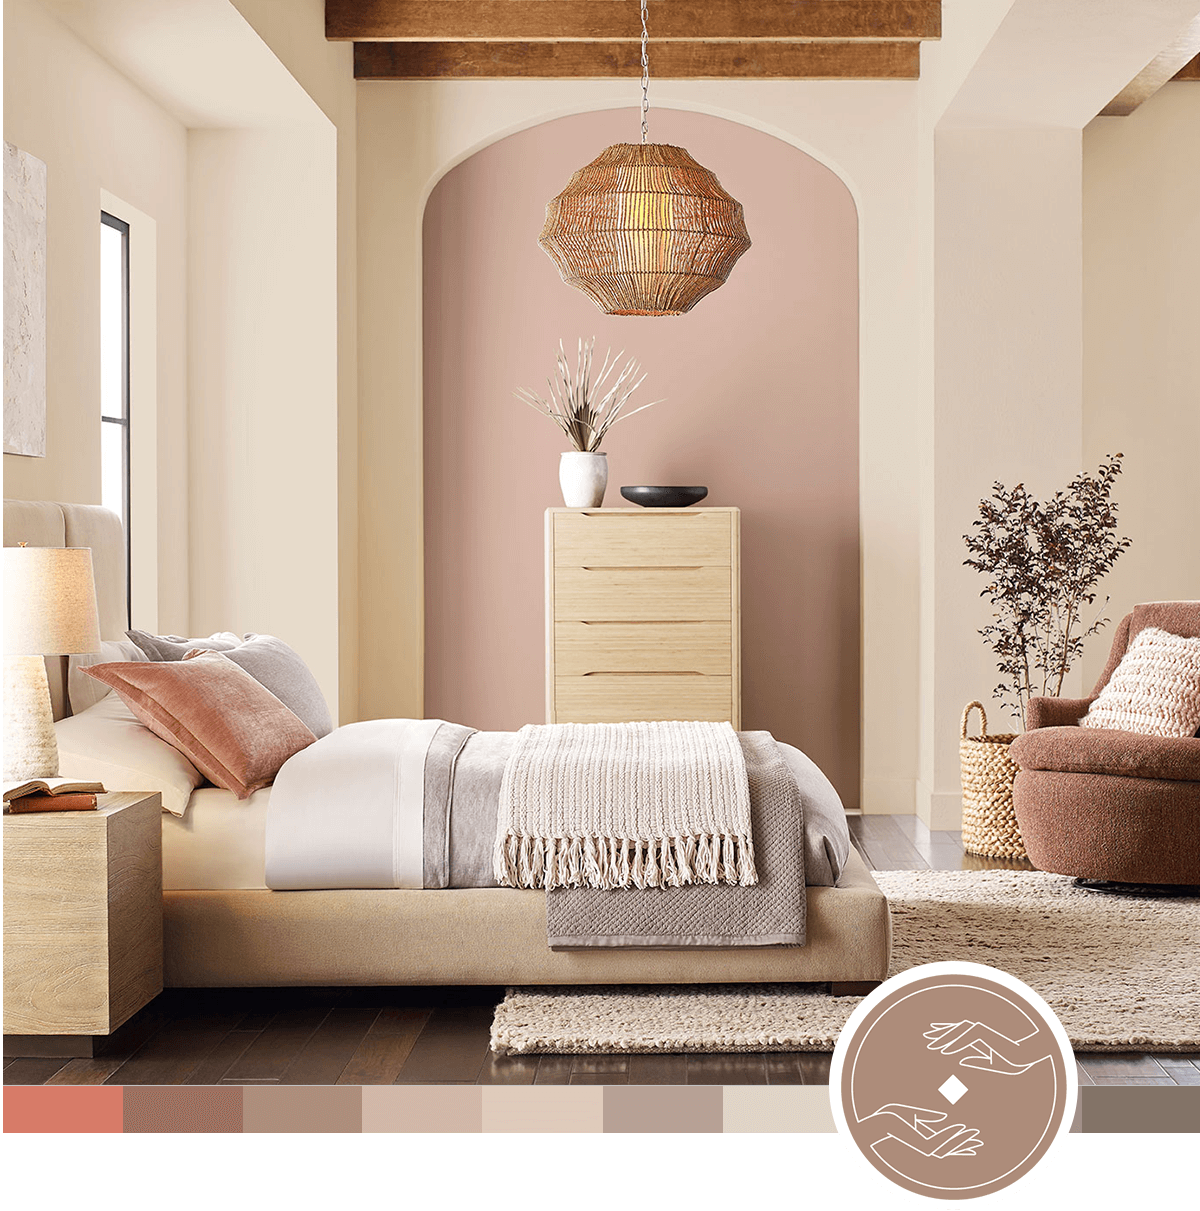 Image of a bedroom painted in the Nexus pallette